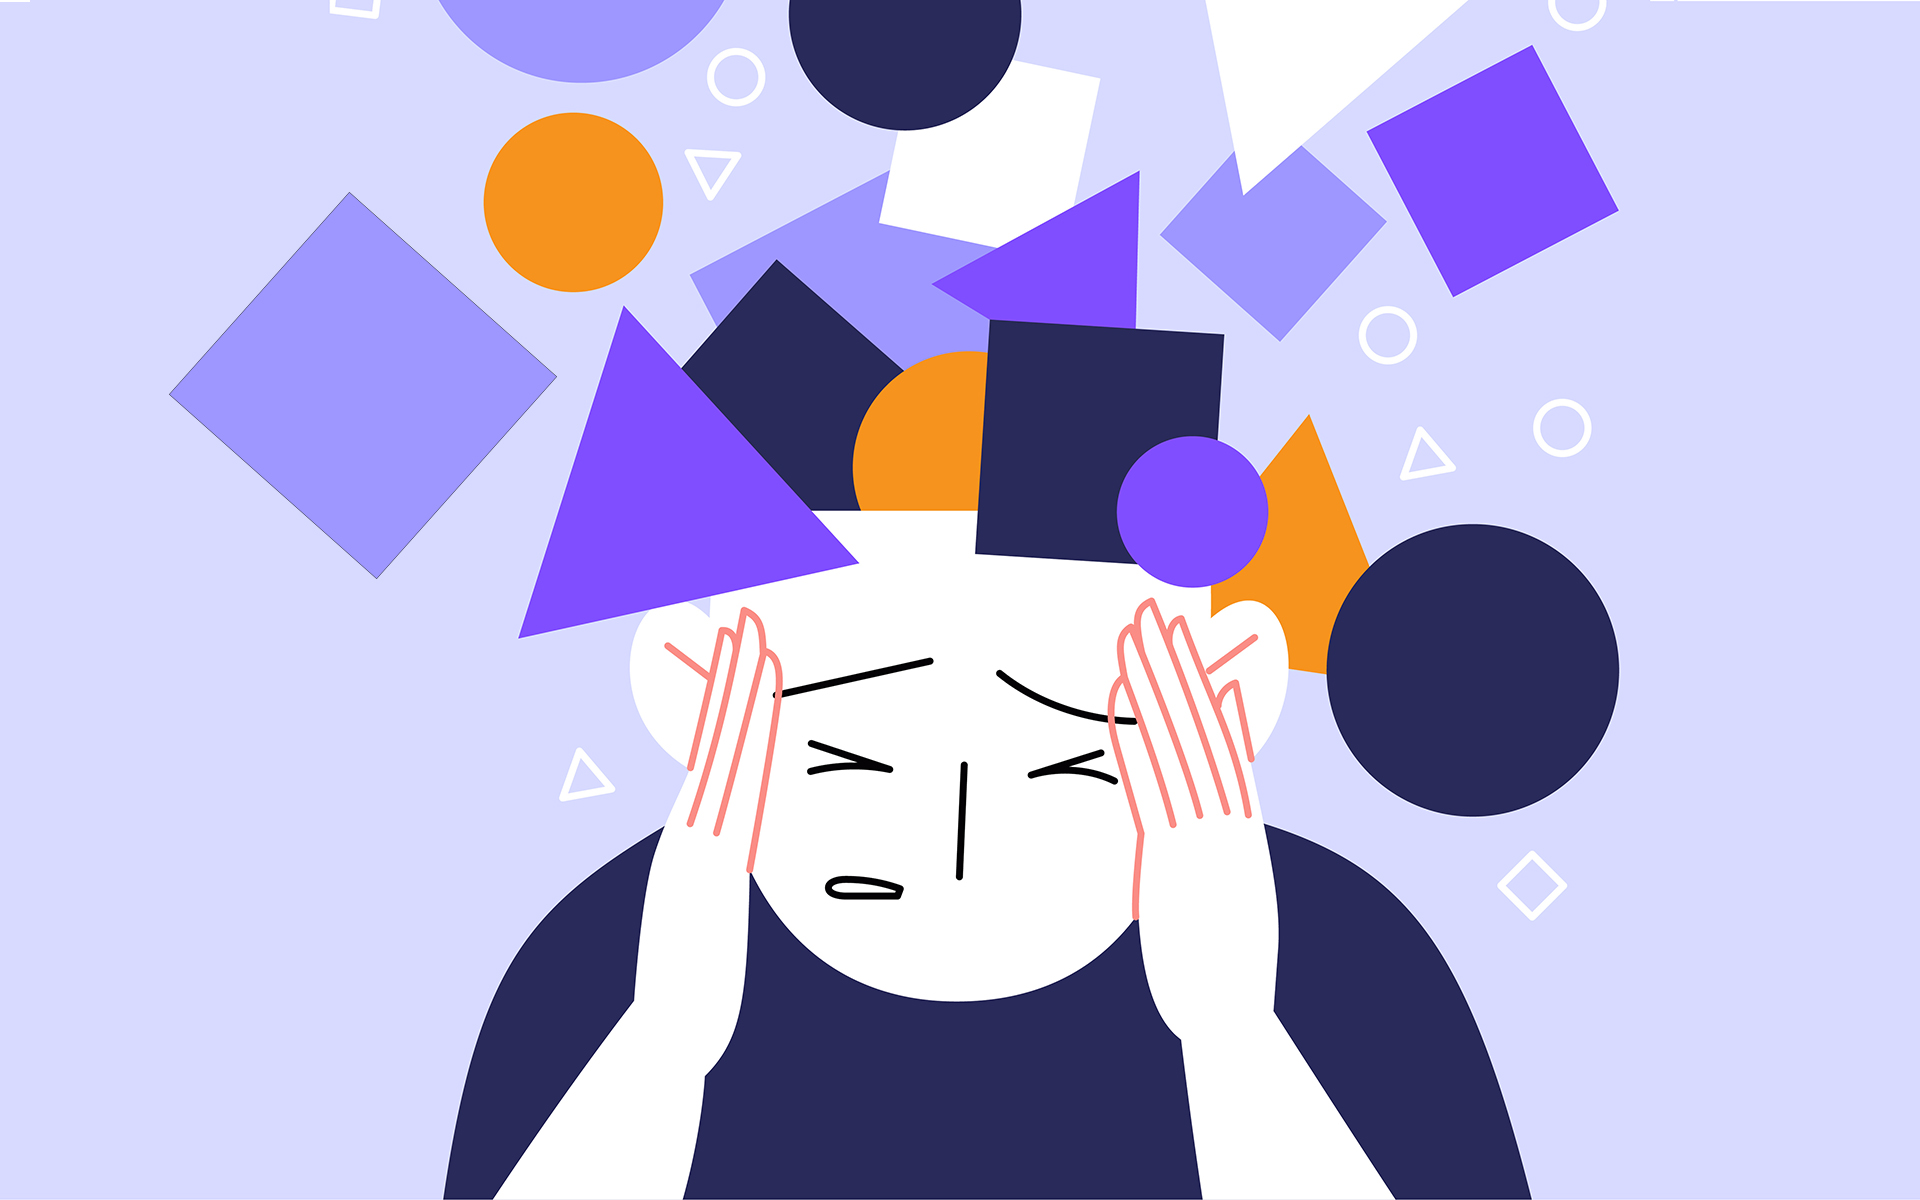 Calming the rush of panic in your emotions - Illustration of a person feeling panicky with geometric shapes coming out of their head